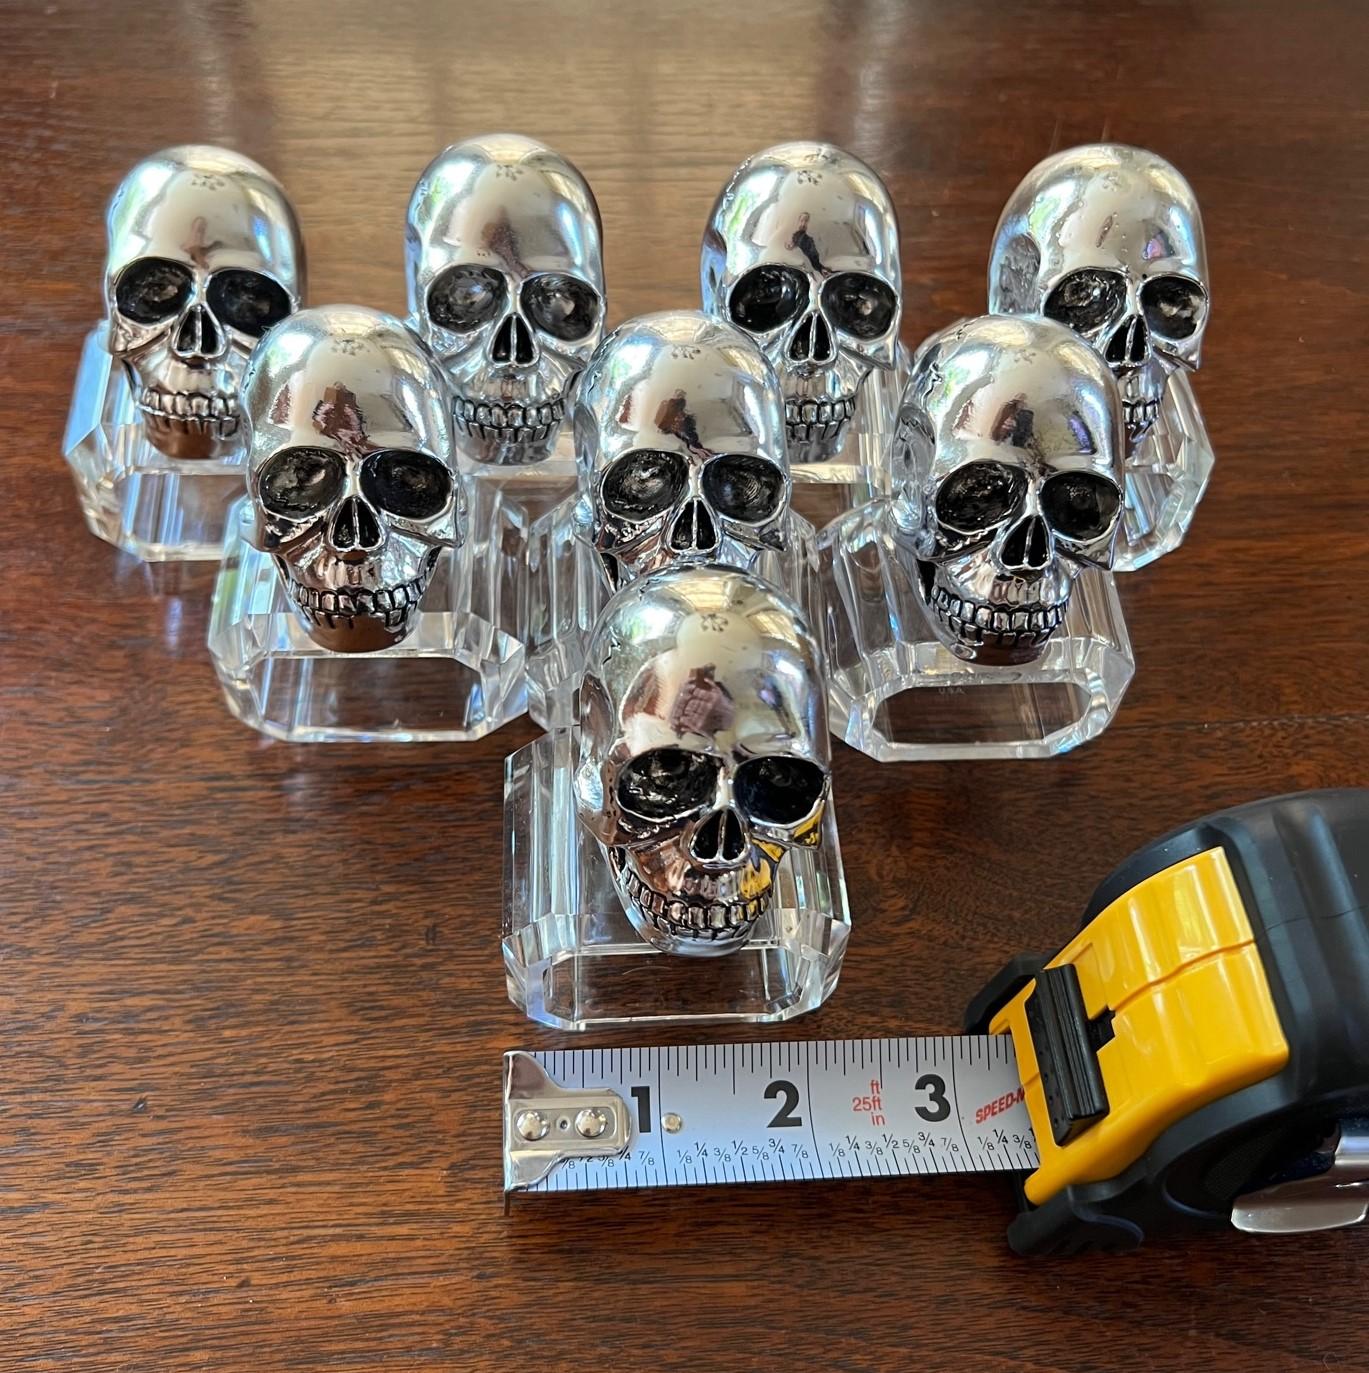 Late 20th c a set of 8 molded skull heads on lucite modern bases, outstanding details on the heads. Great for Halloween or year round entertaining. Nice substantial weight.

Dimensions:
Each ring approx 2.25